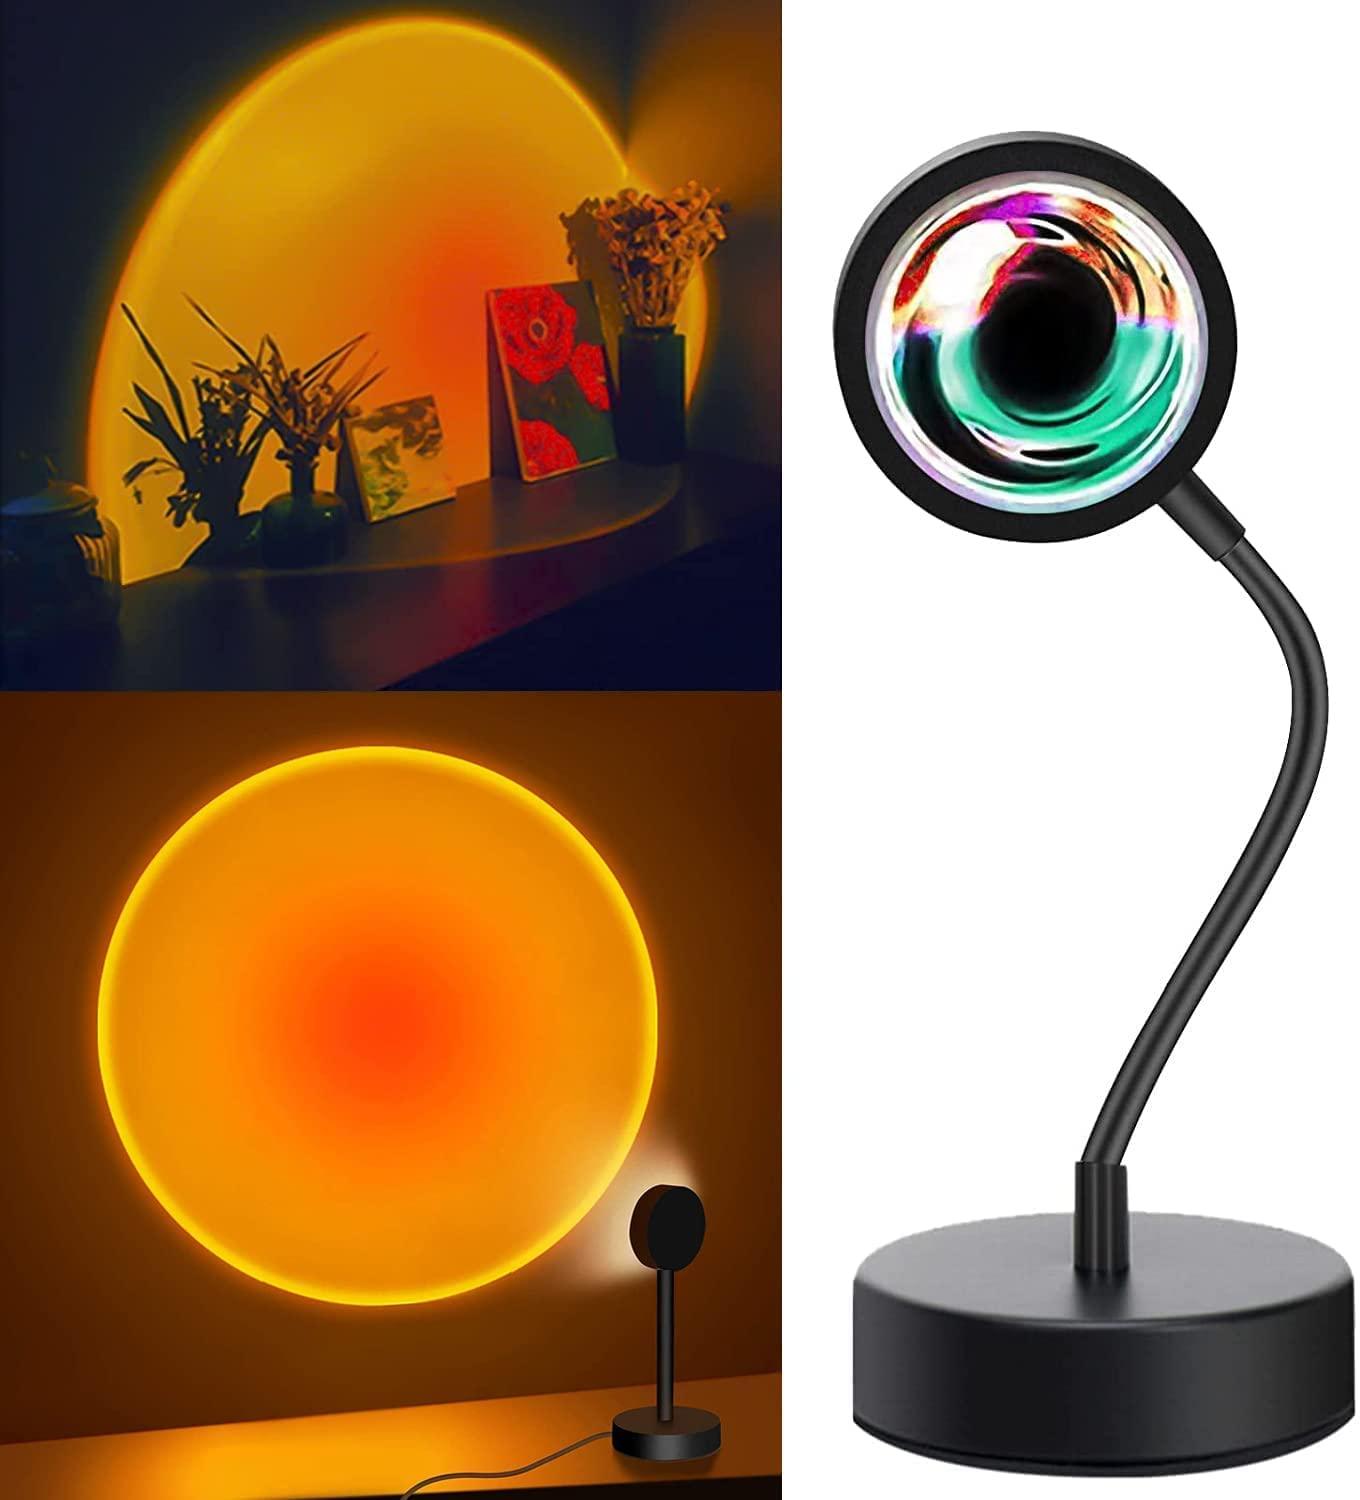 Sunset Lamp Projector, 360degree Sunset Projection Lamp Dimmable LED Night Light Projector for Kids Bedroom/Room Decor - Lasercutwraps Shop